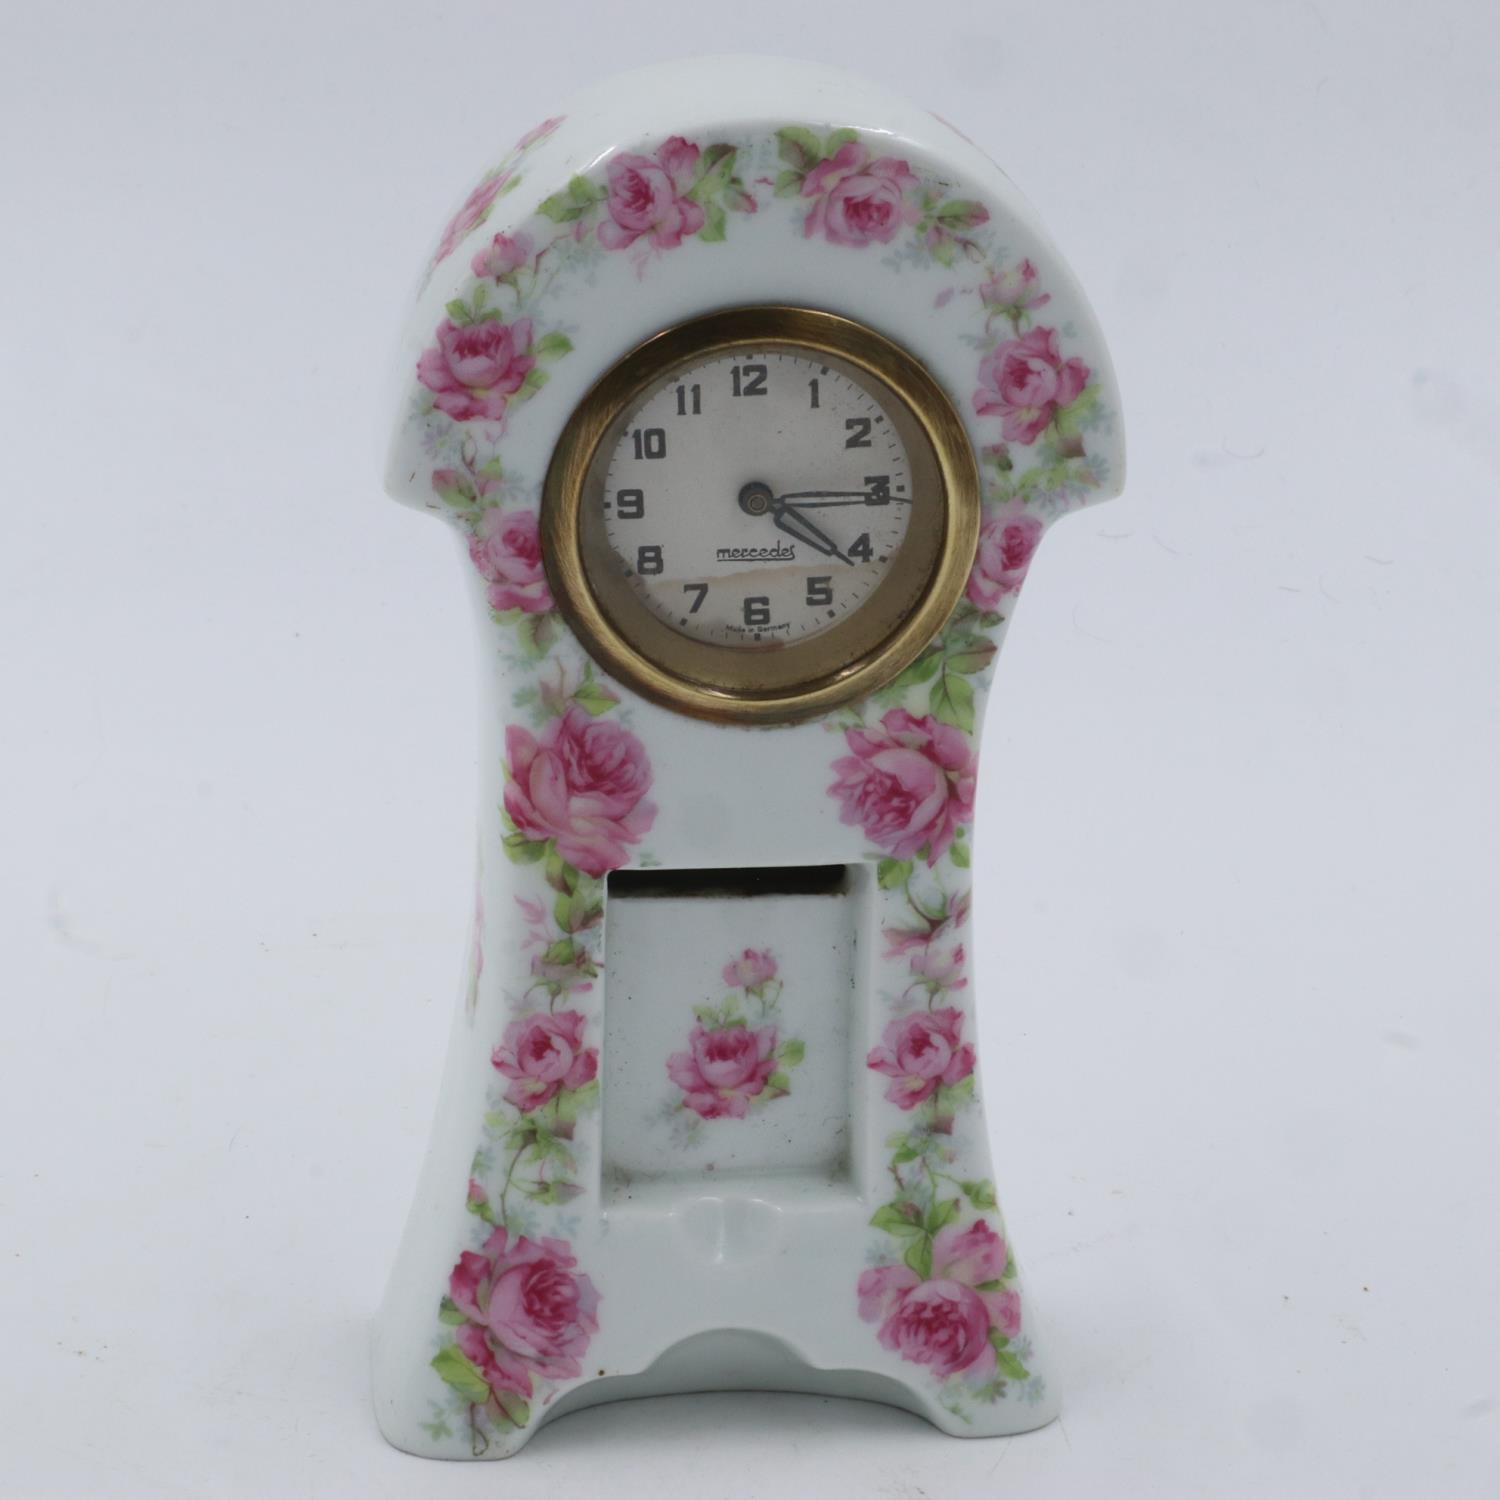 Mercedes ceramic mantel clock with incorporated match box, working, H: 20 cm. UK P&P Group 2 (£20+